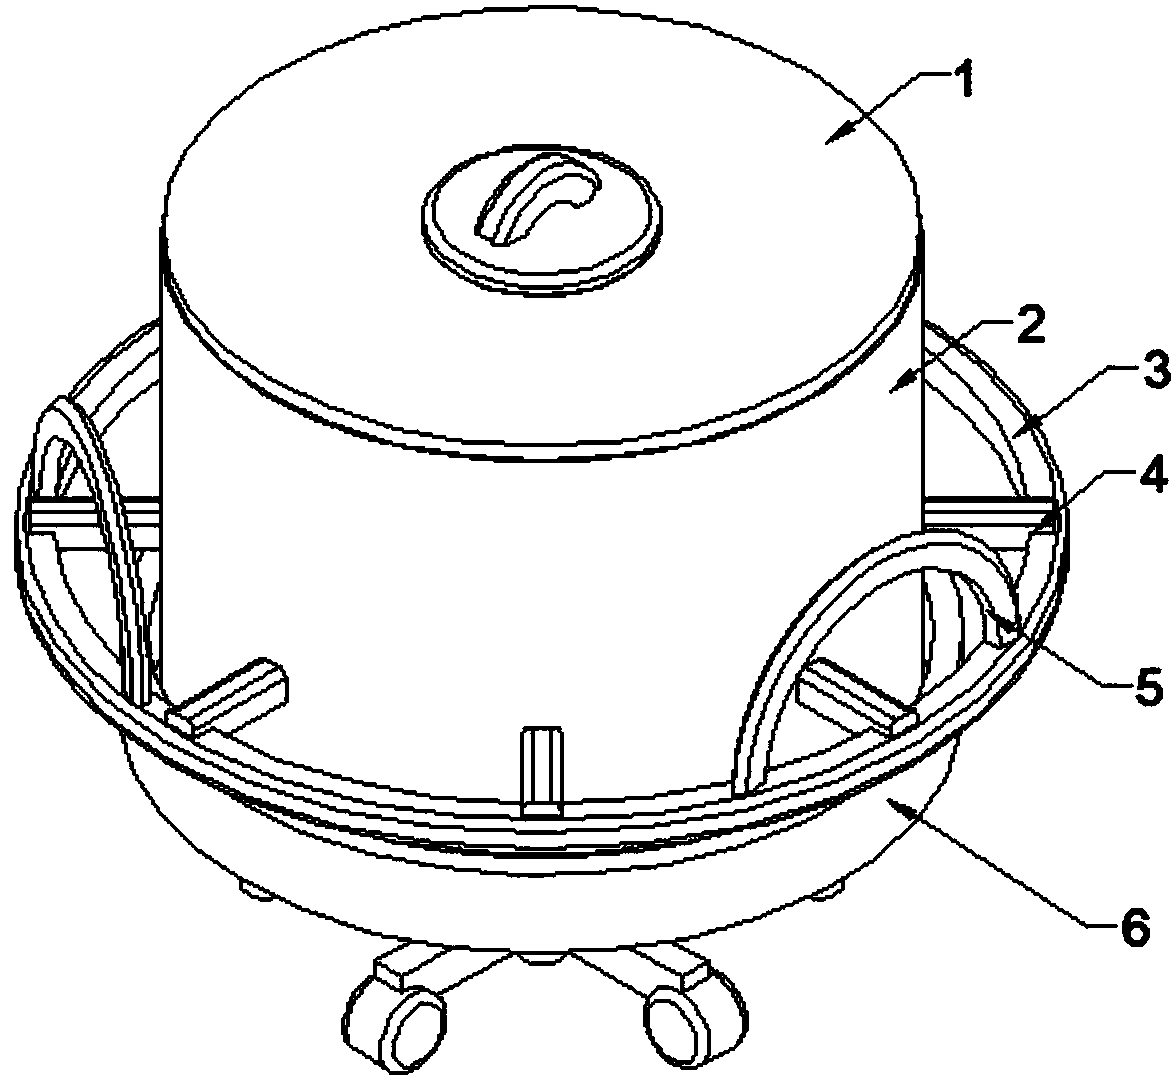 Coating container with selectable transportation modes